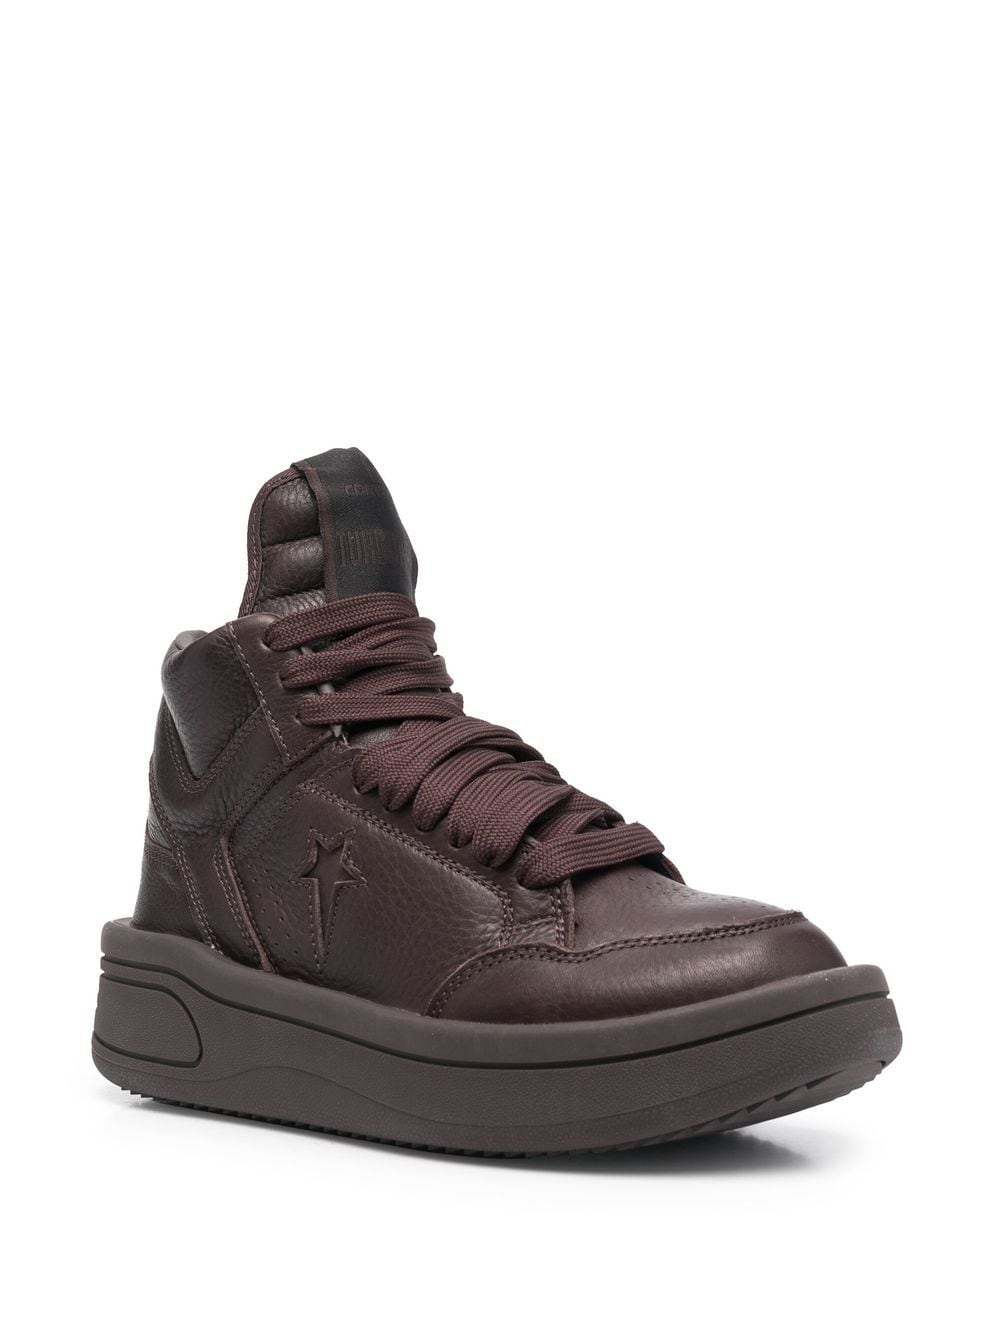 Rick Owens DRKSHDW x Converse lace-up Sneakers - Farfetch